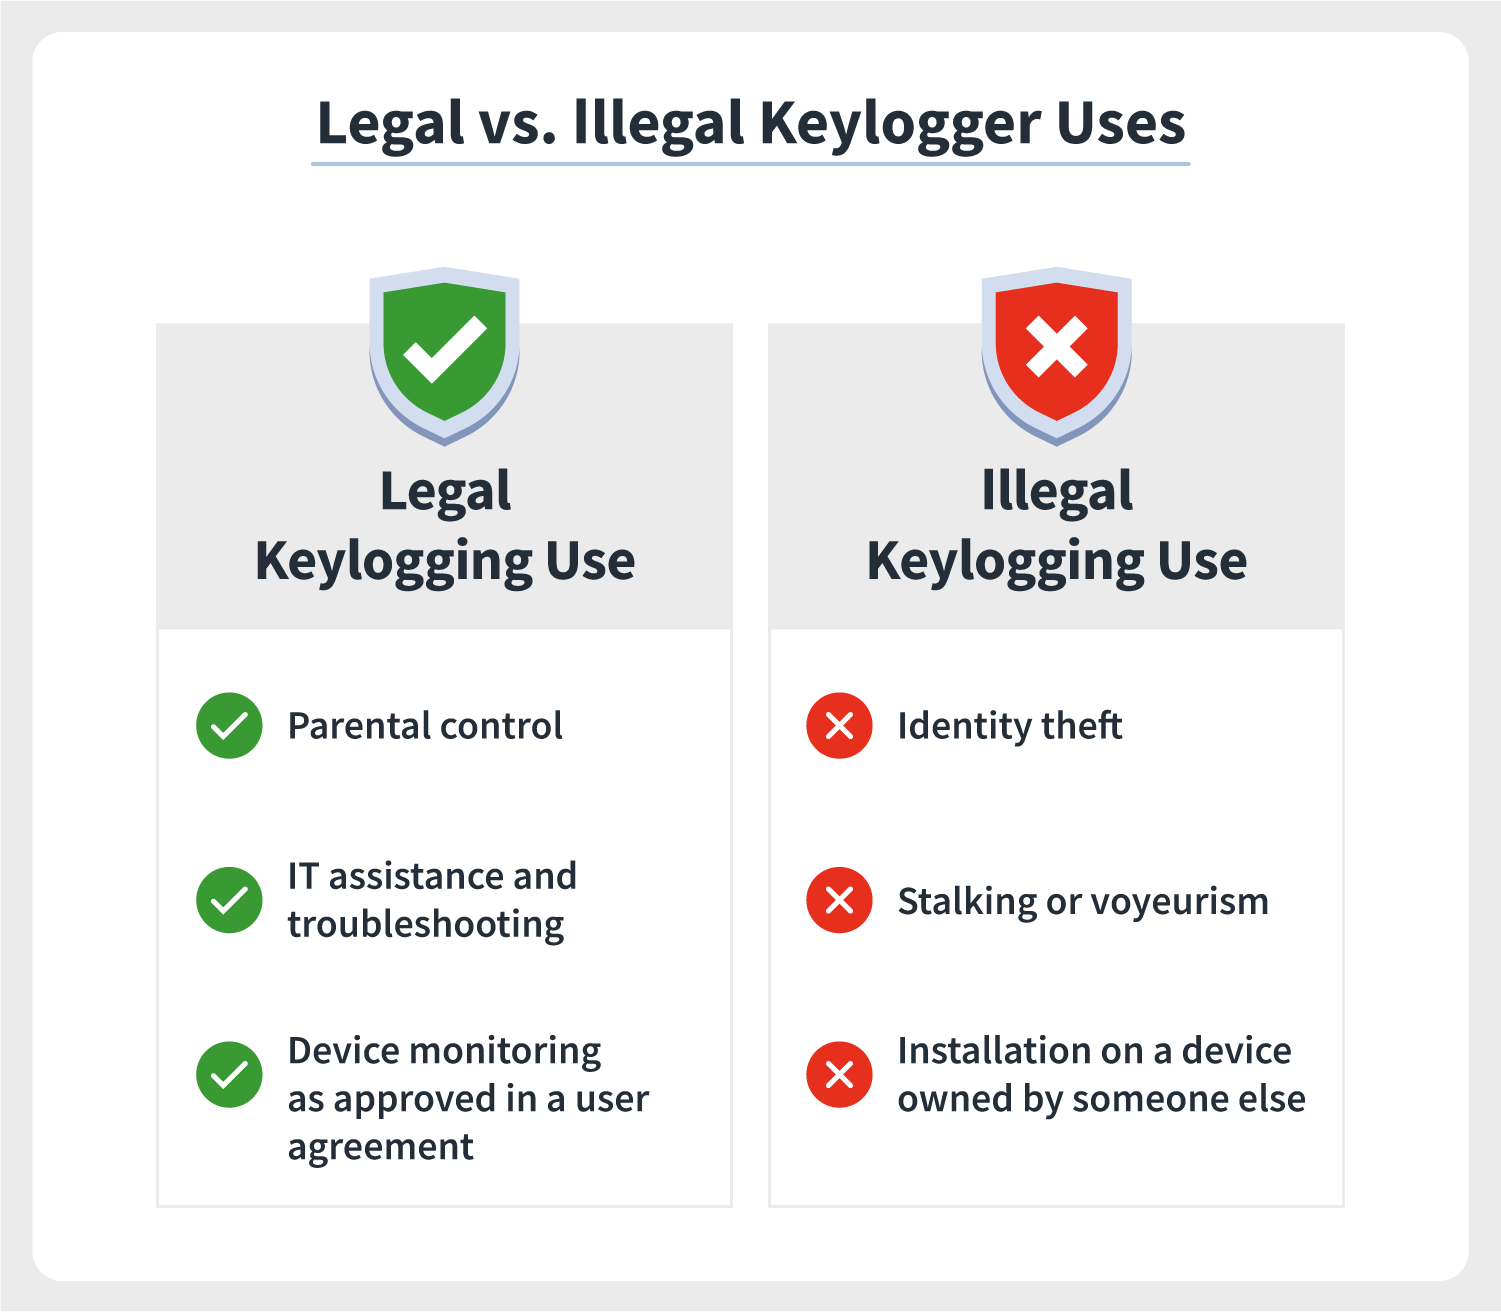 Keylogger: What is |